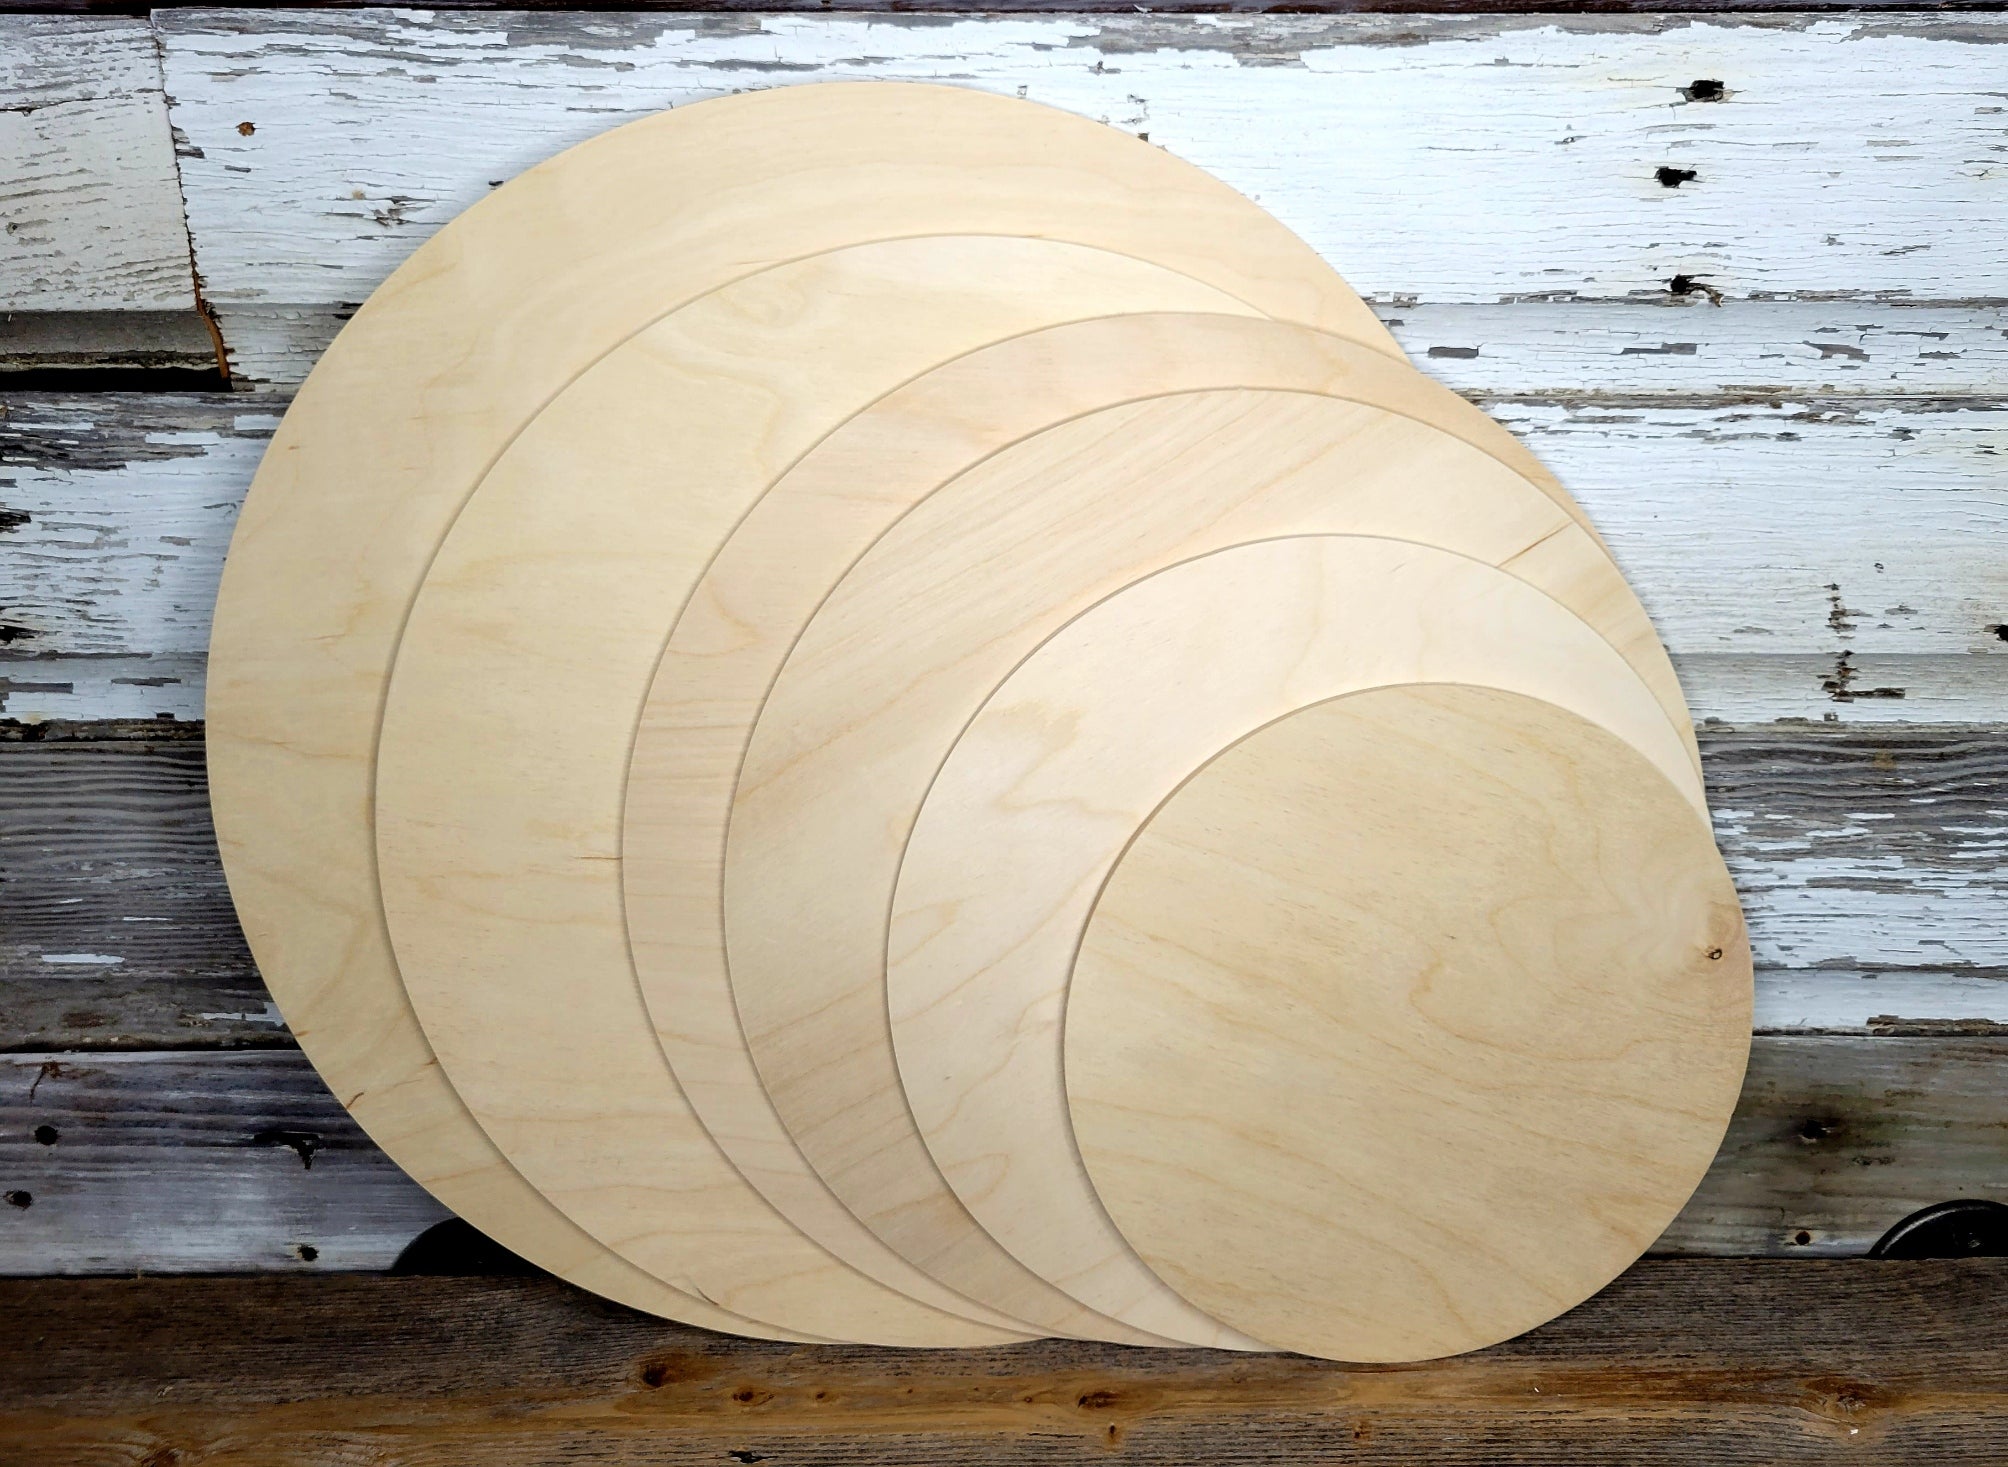 Where Do You Find Unfinished Wood Rounds?